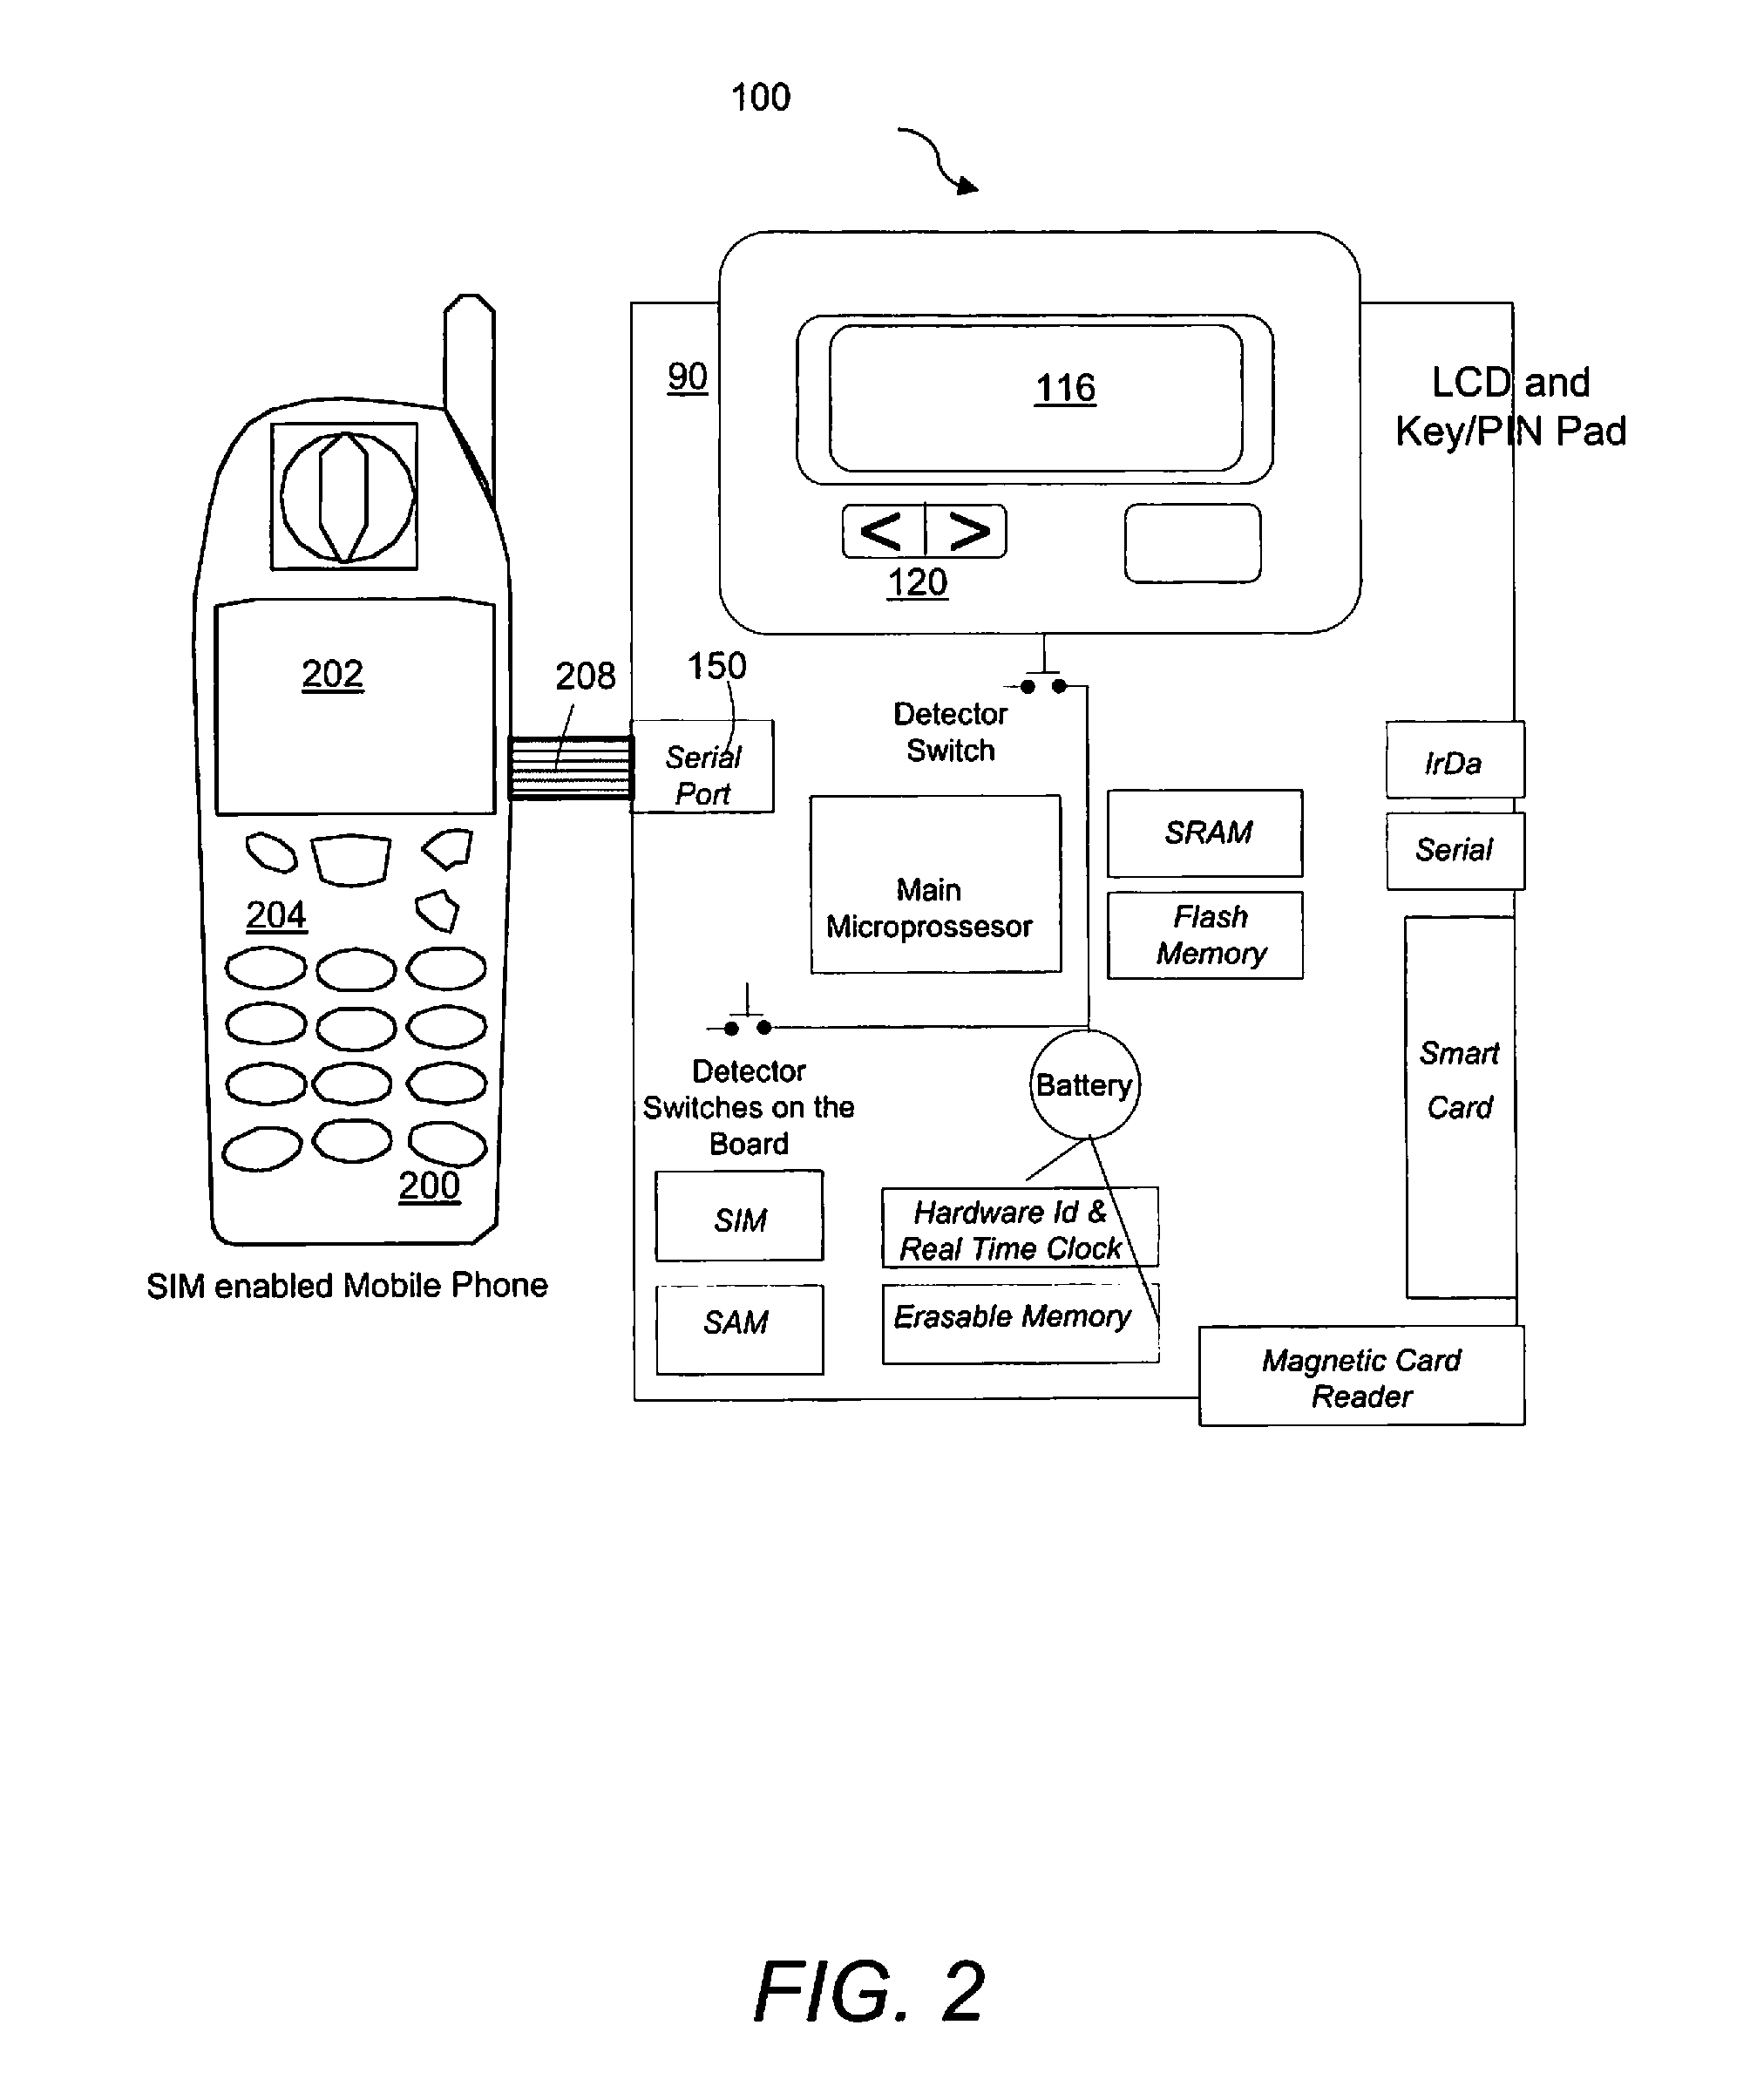 Secure pin entry device for mobile phones